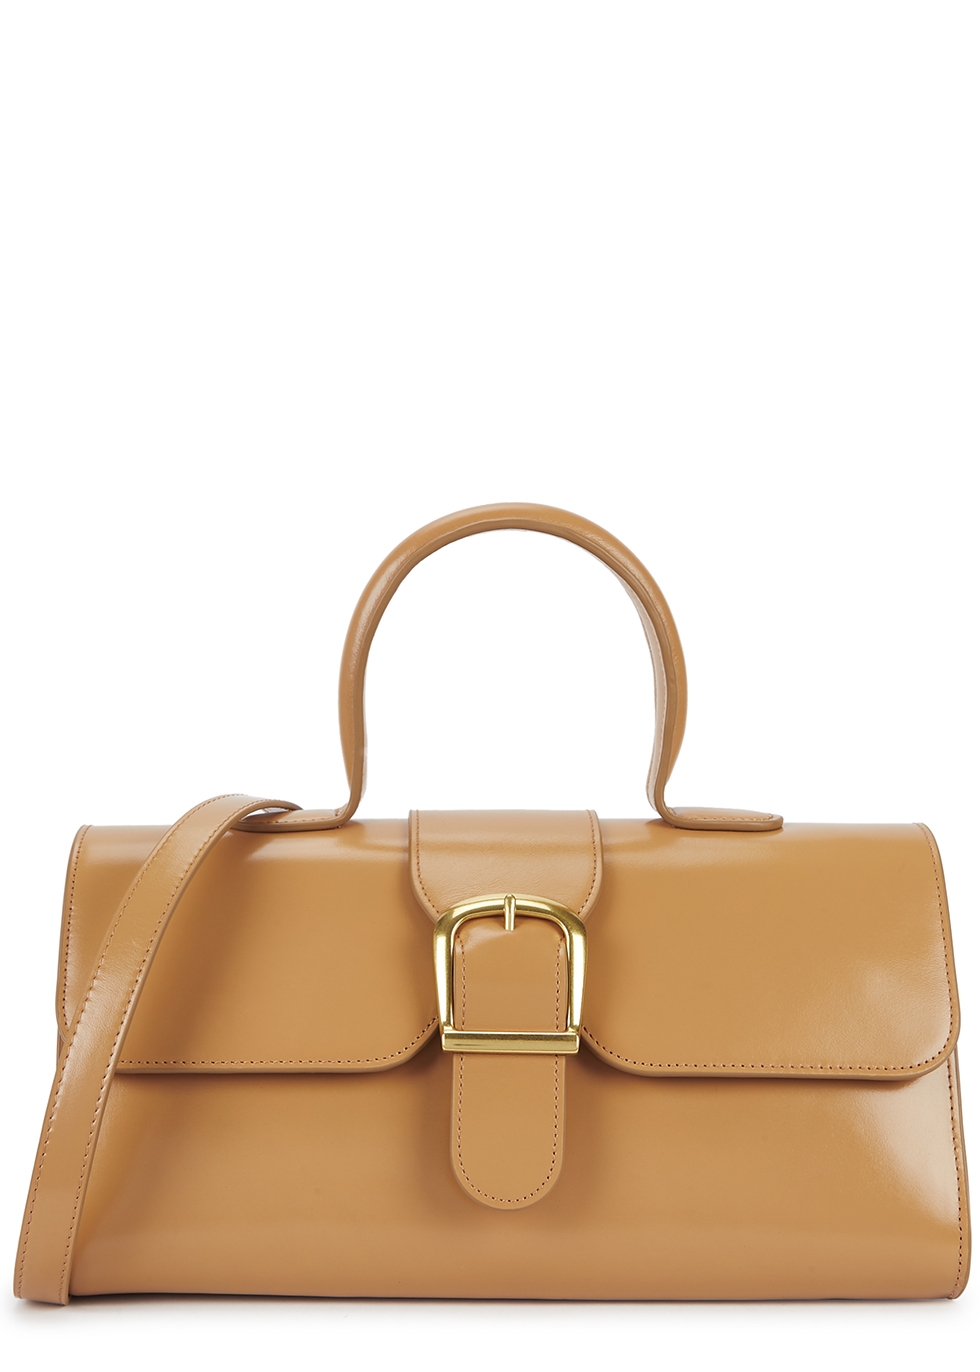 1.14 large camel leather top handle bag